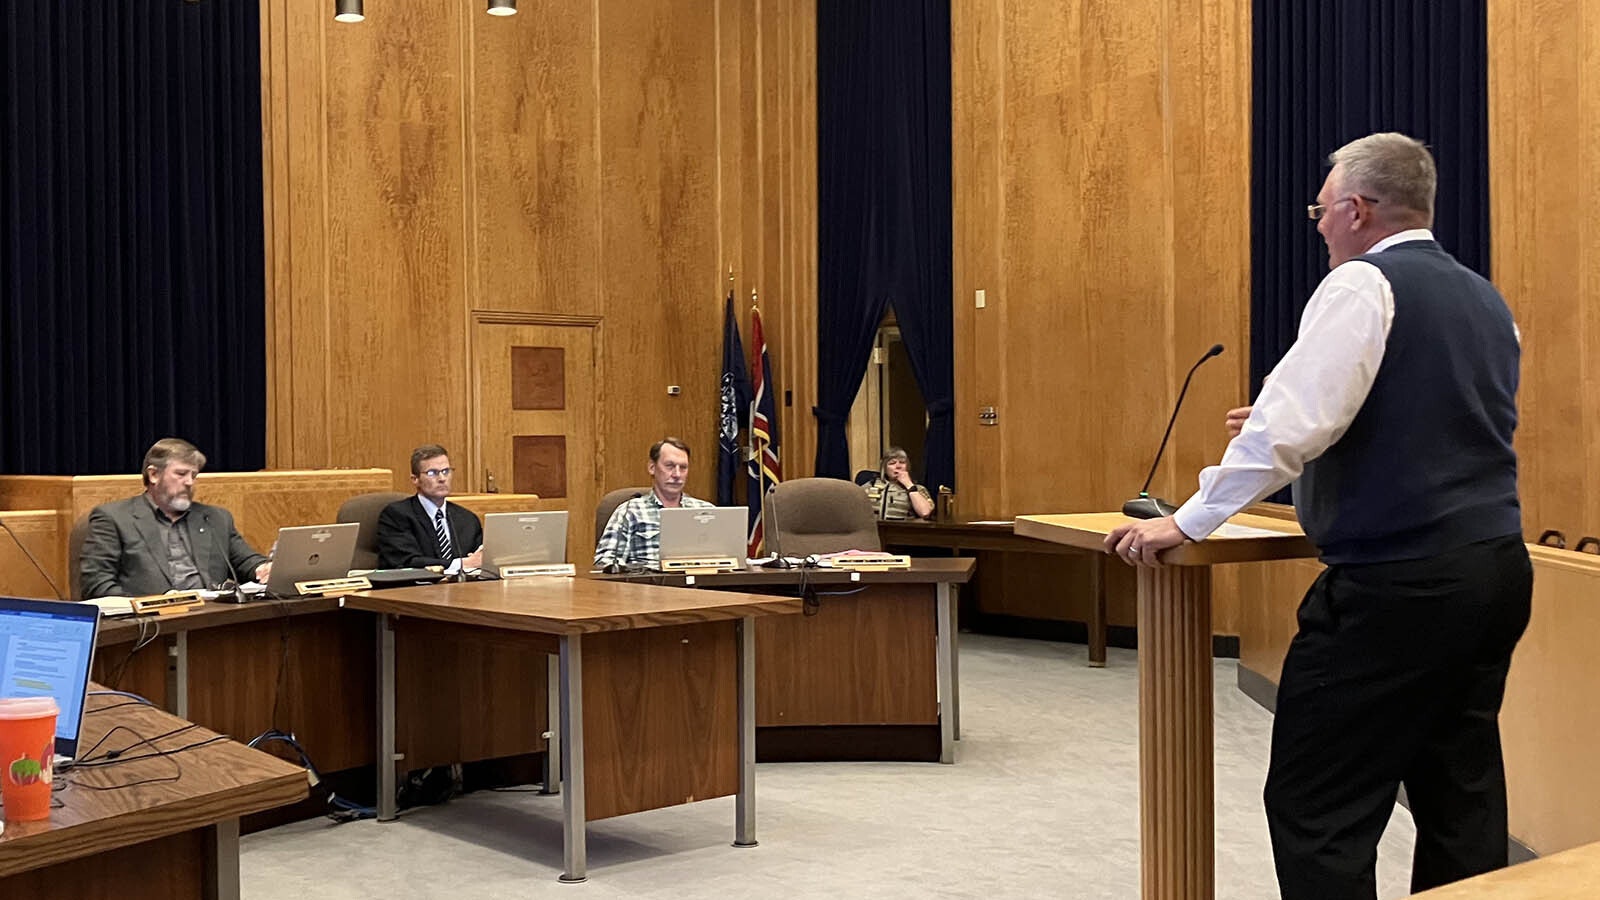 Prism Logistics Manager Kyle True invited Natrona County commissioners to a presentation he plans to give on his proposed gravel mining near Casper Mountain and how it could be done in a way that would mitigate resident concerns.